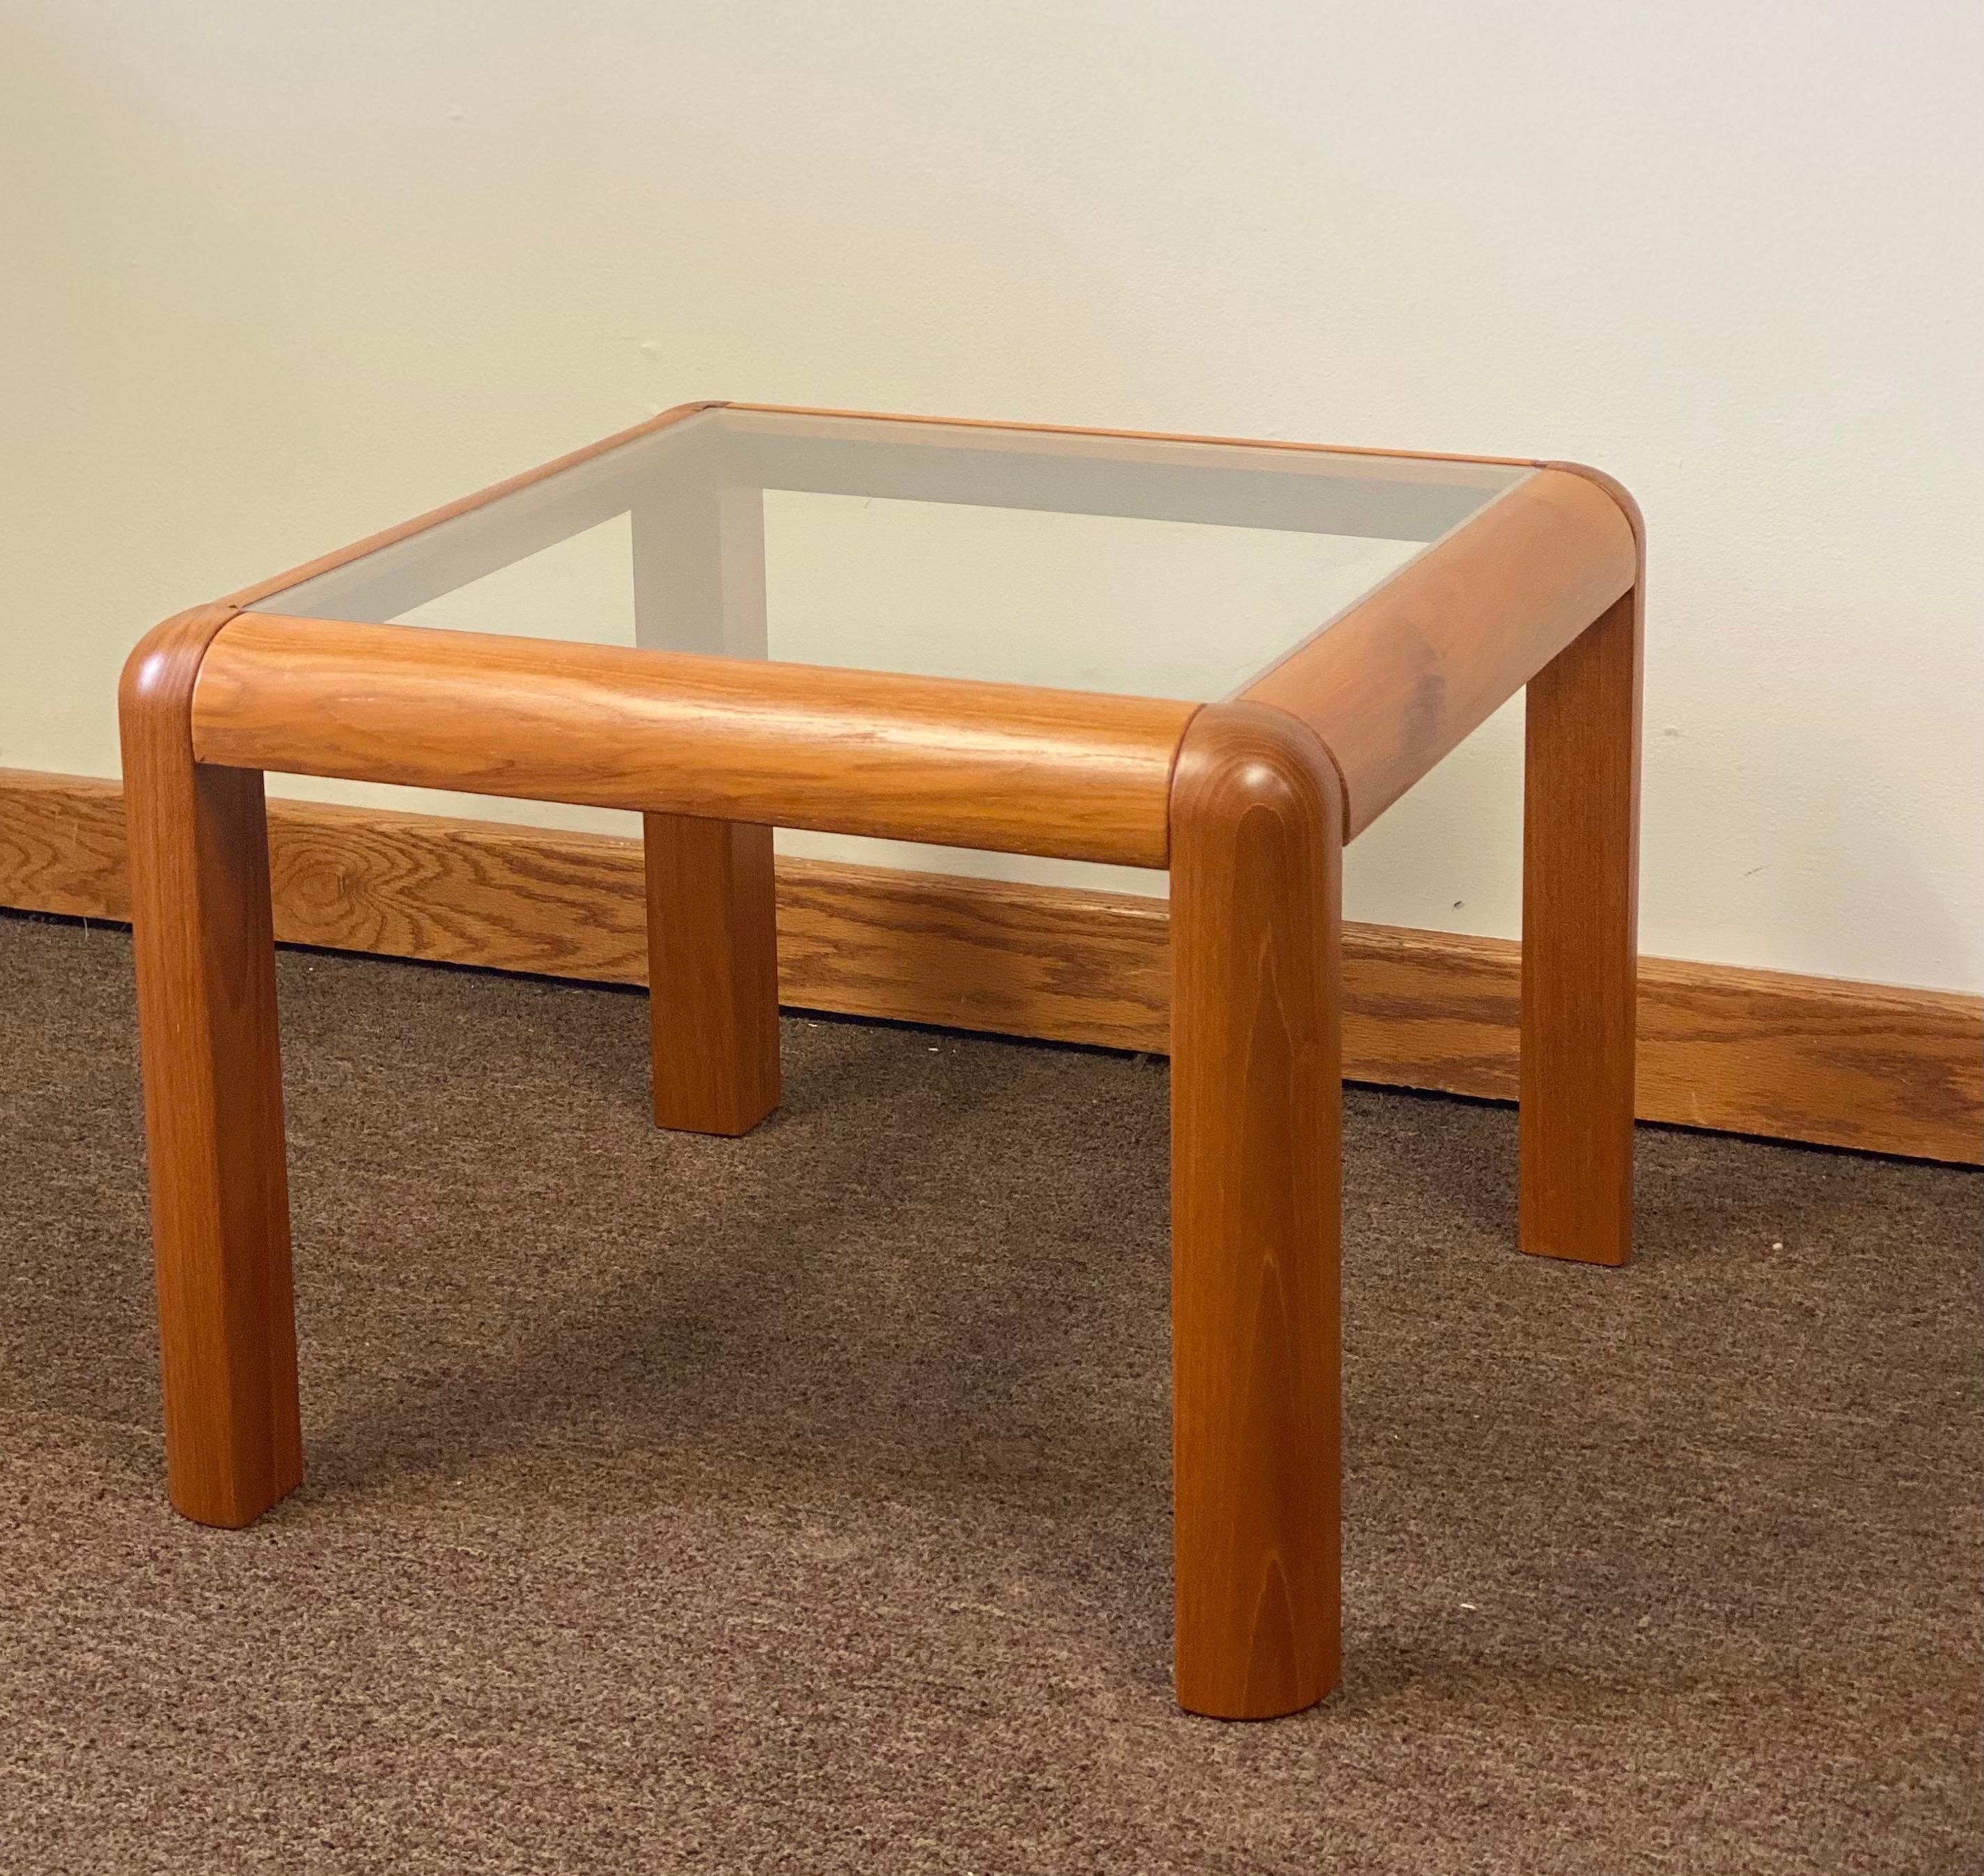 1960s Danish Trioh-Mobler Teak and Glass Square Side Tables, a Pair For Sale 1